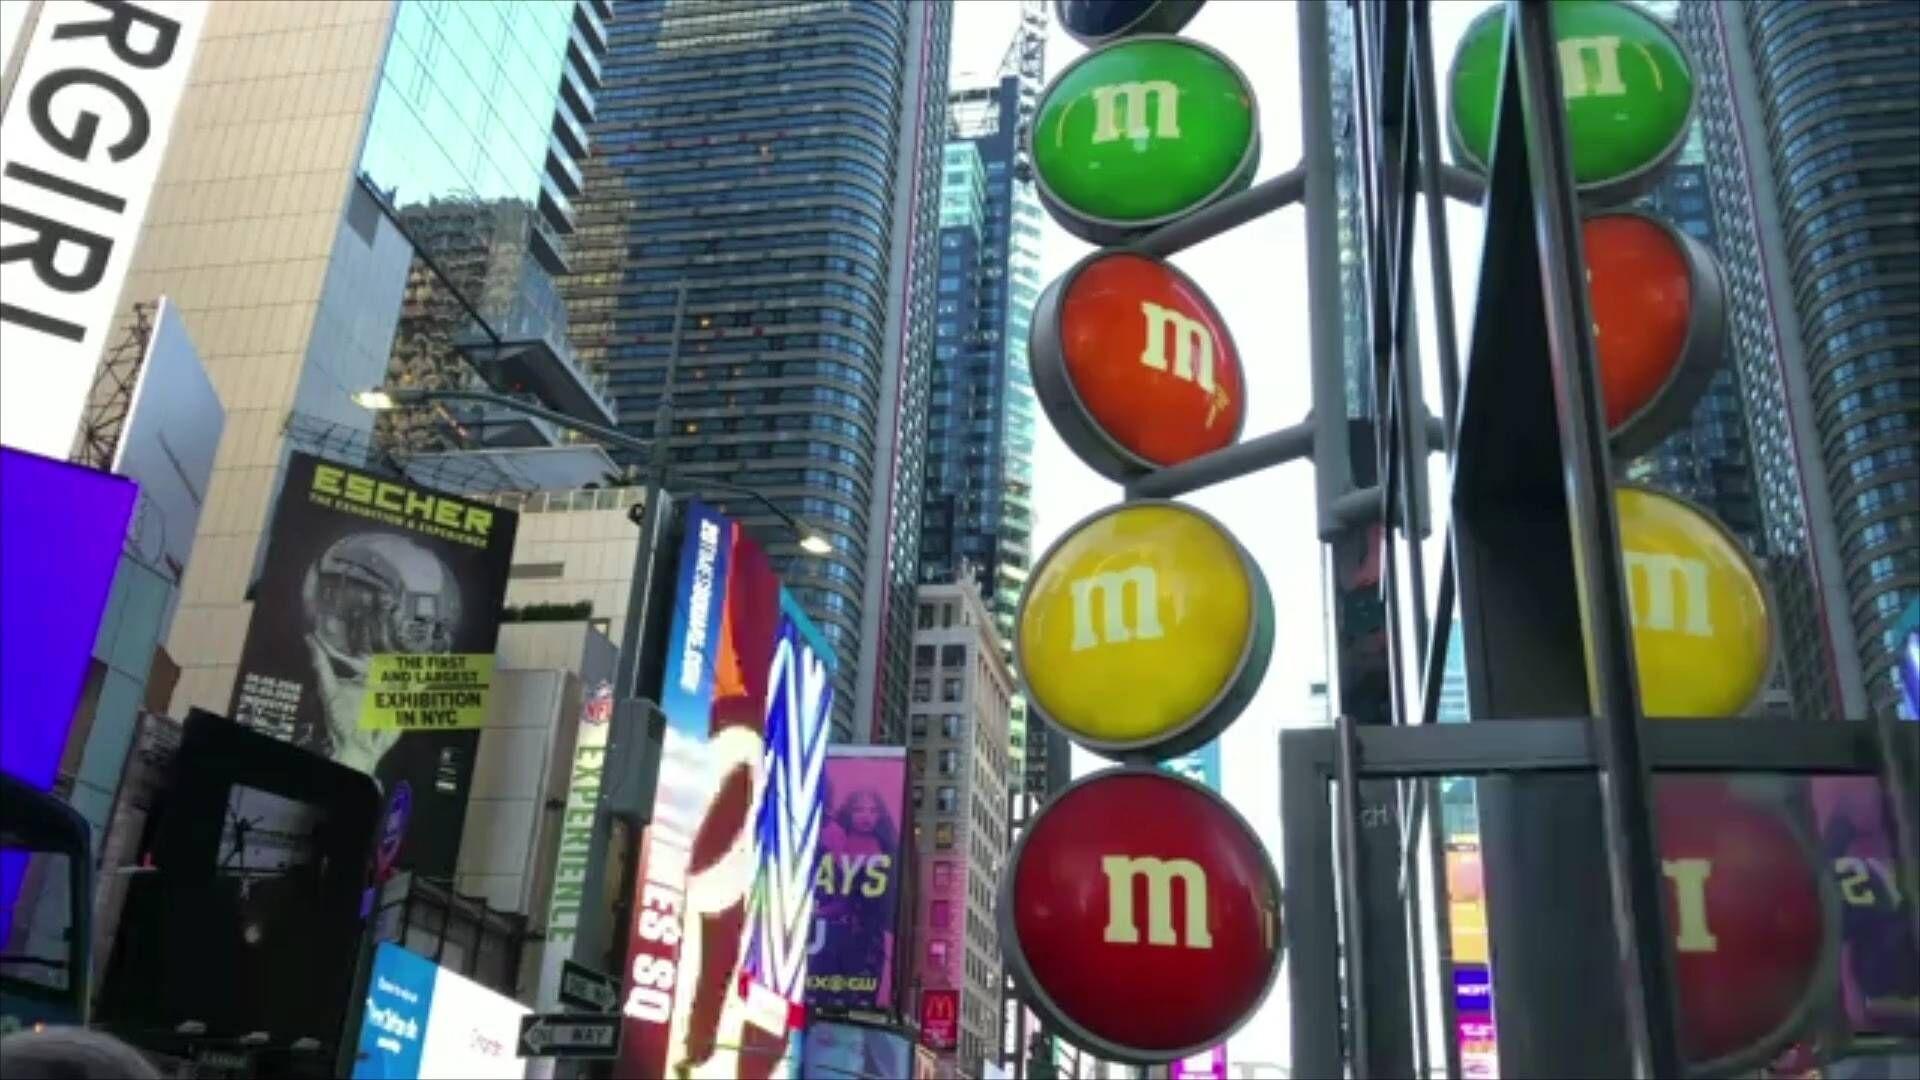 What happened to Yellow? M&M'S delights viewers with 'nutty' Super Bowl ad, 2014-02-13